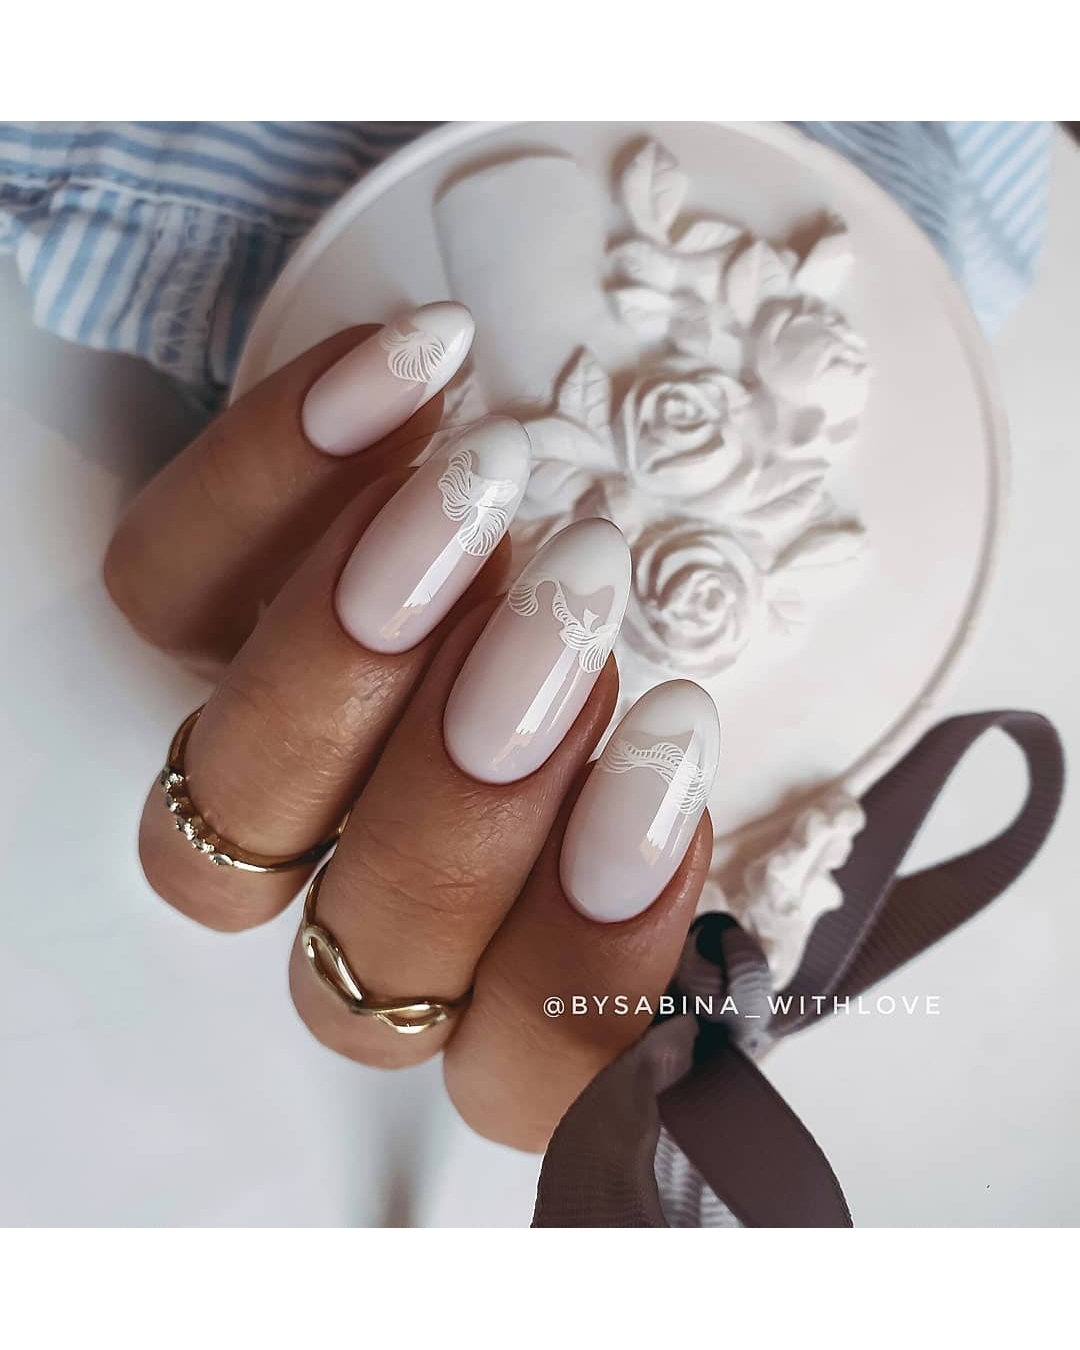 Unghie tonde bianco latte - @bysabina_withlove